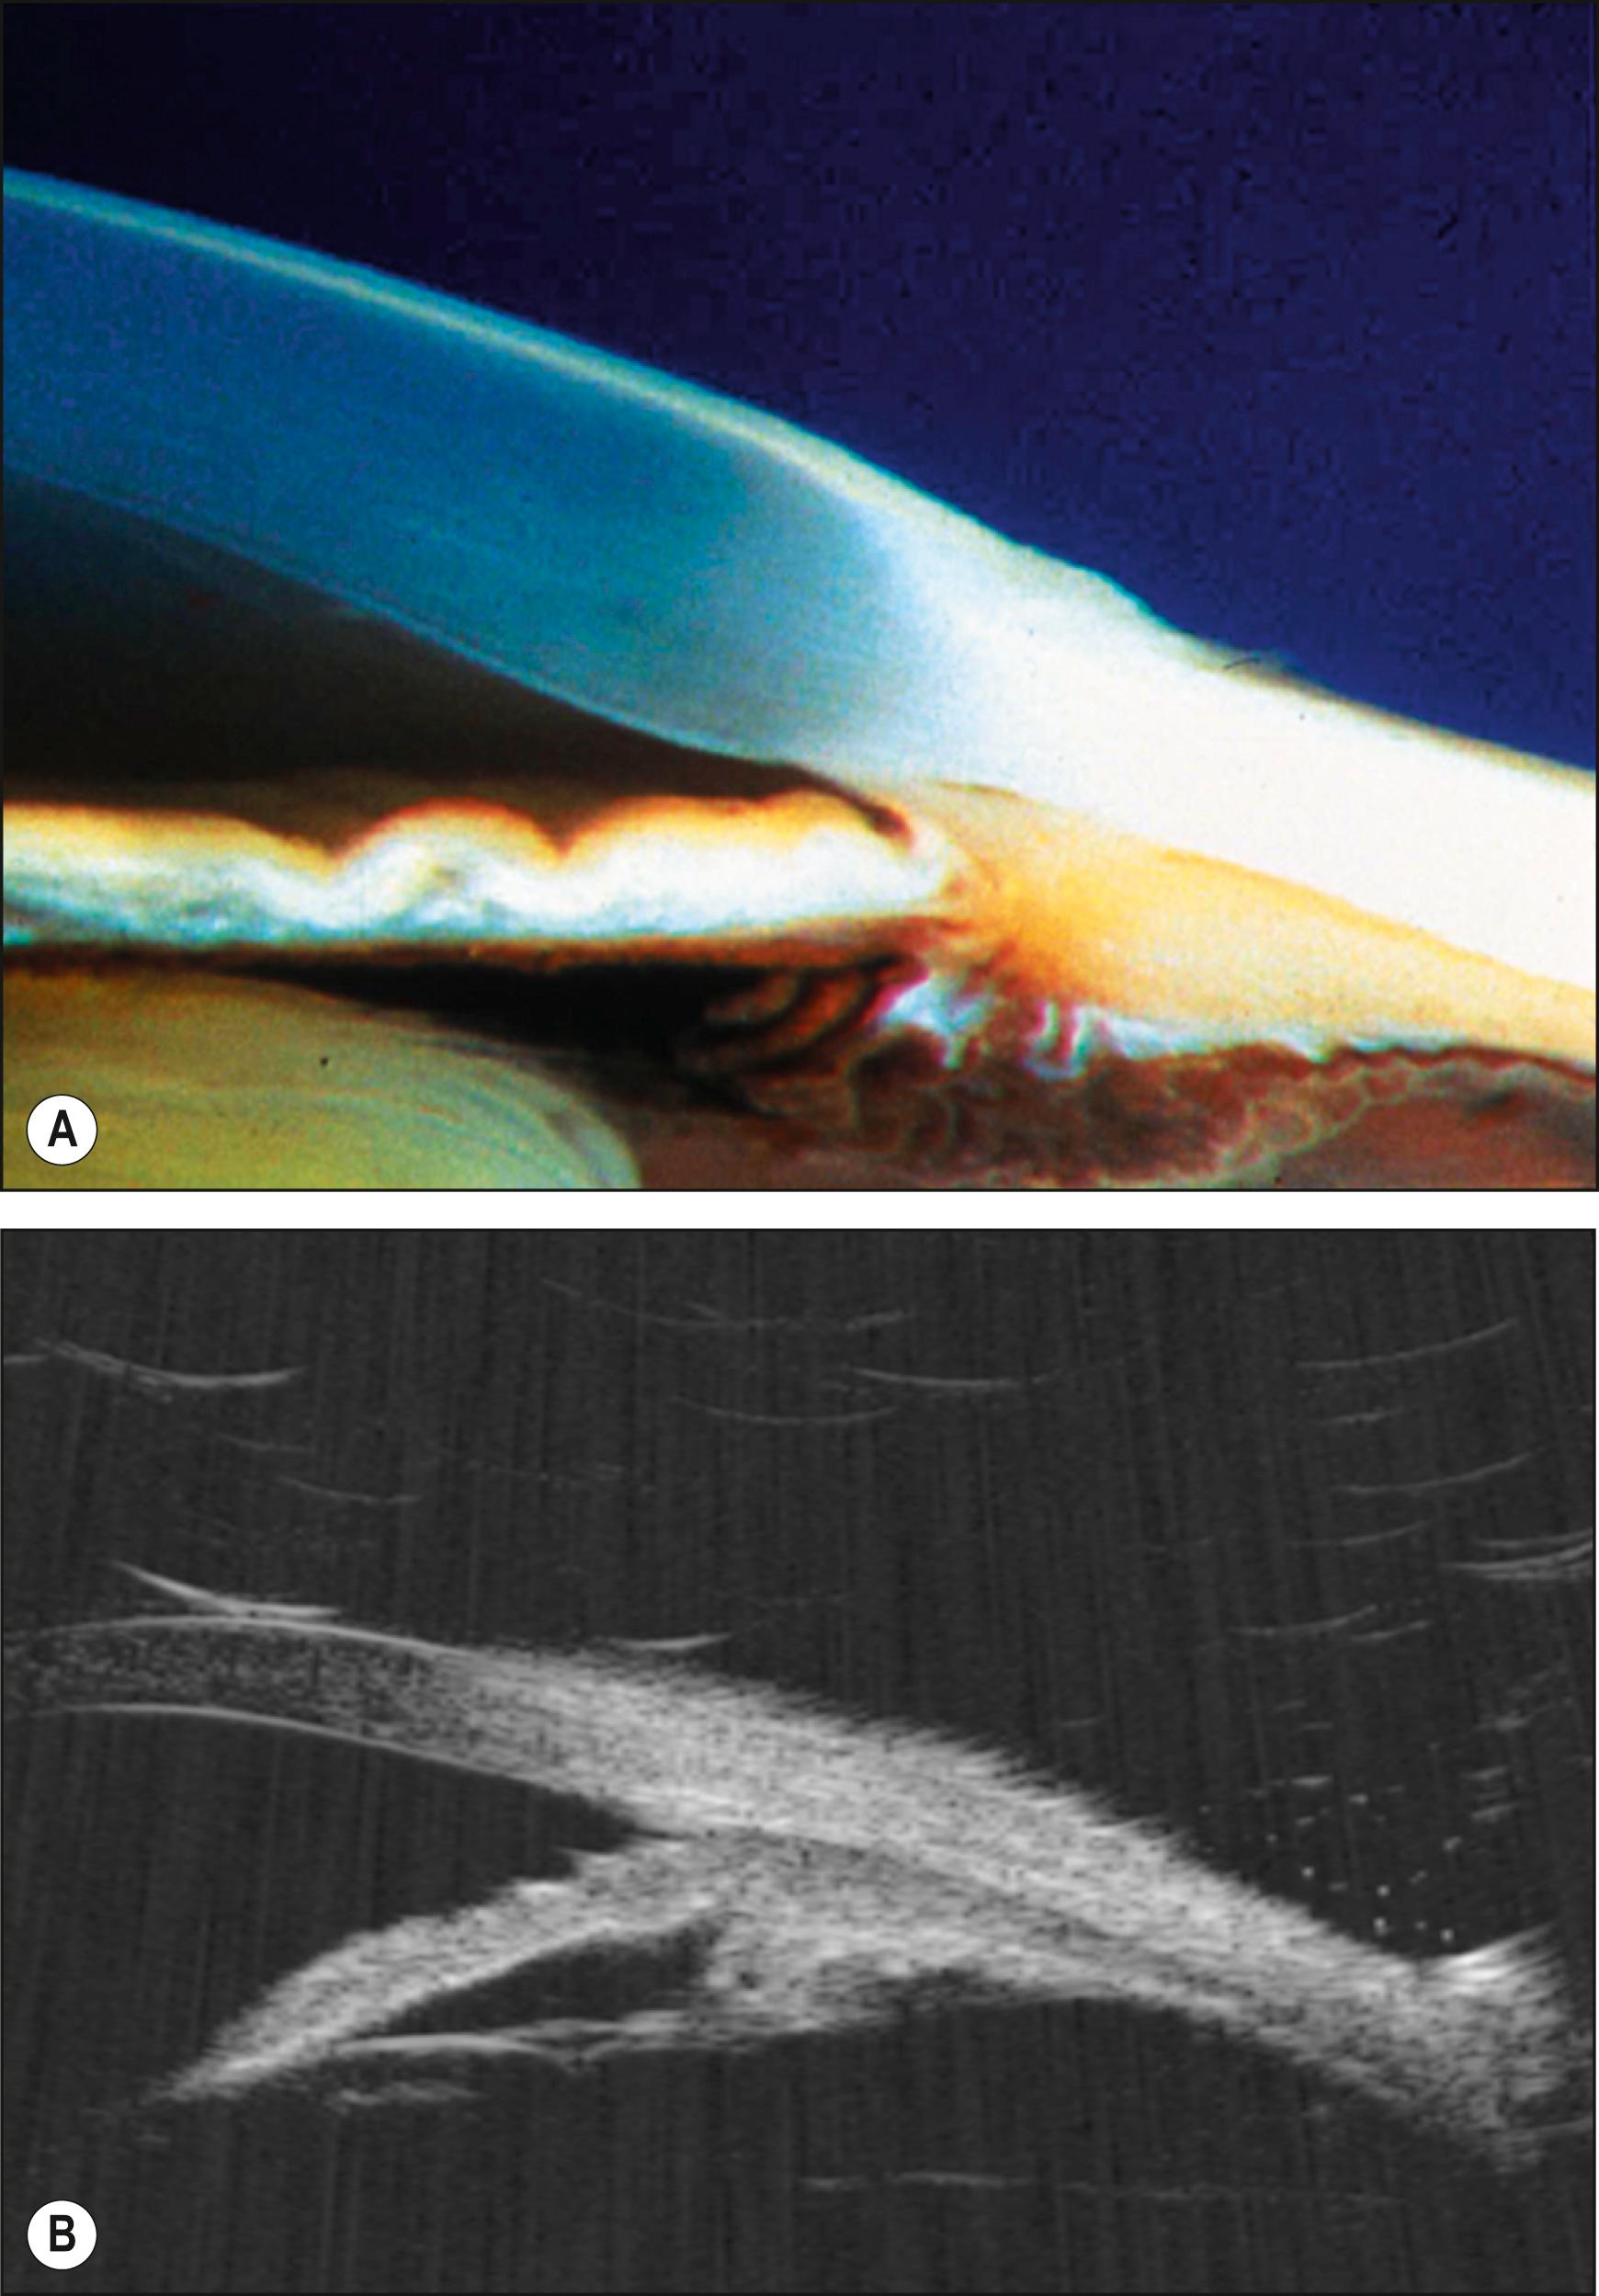 Fig. 18.3, Anatomic structures of the anterior segment, specifically the iridocorneal angle, as visualized by ( A ) gross, pathologic cross-section and ( B ) ultrasound biomicroscopy (UBM).